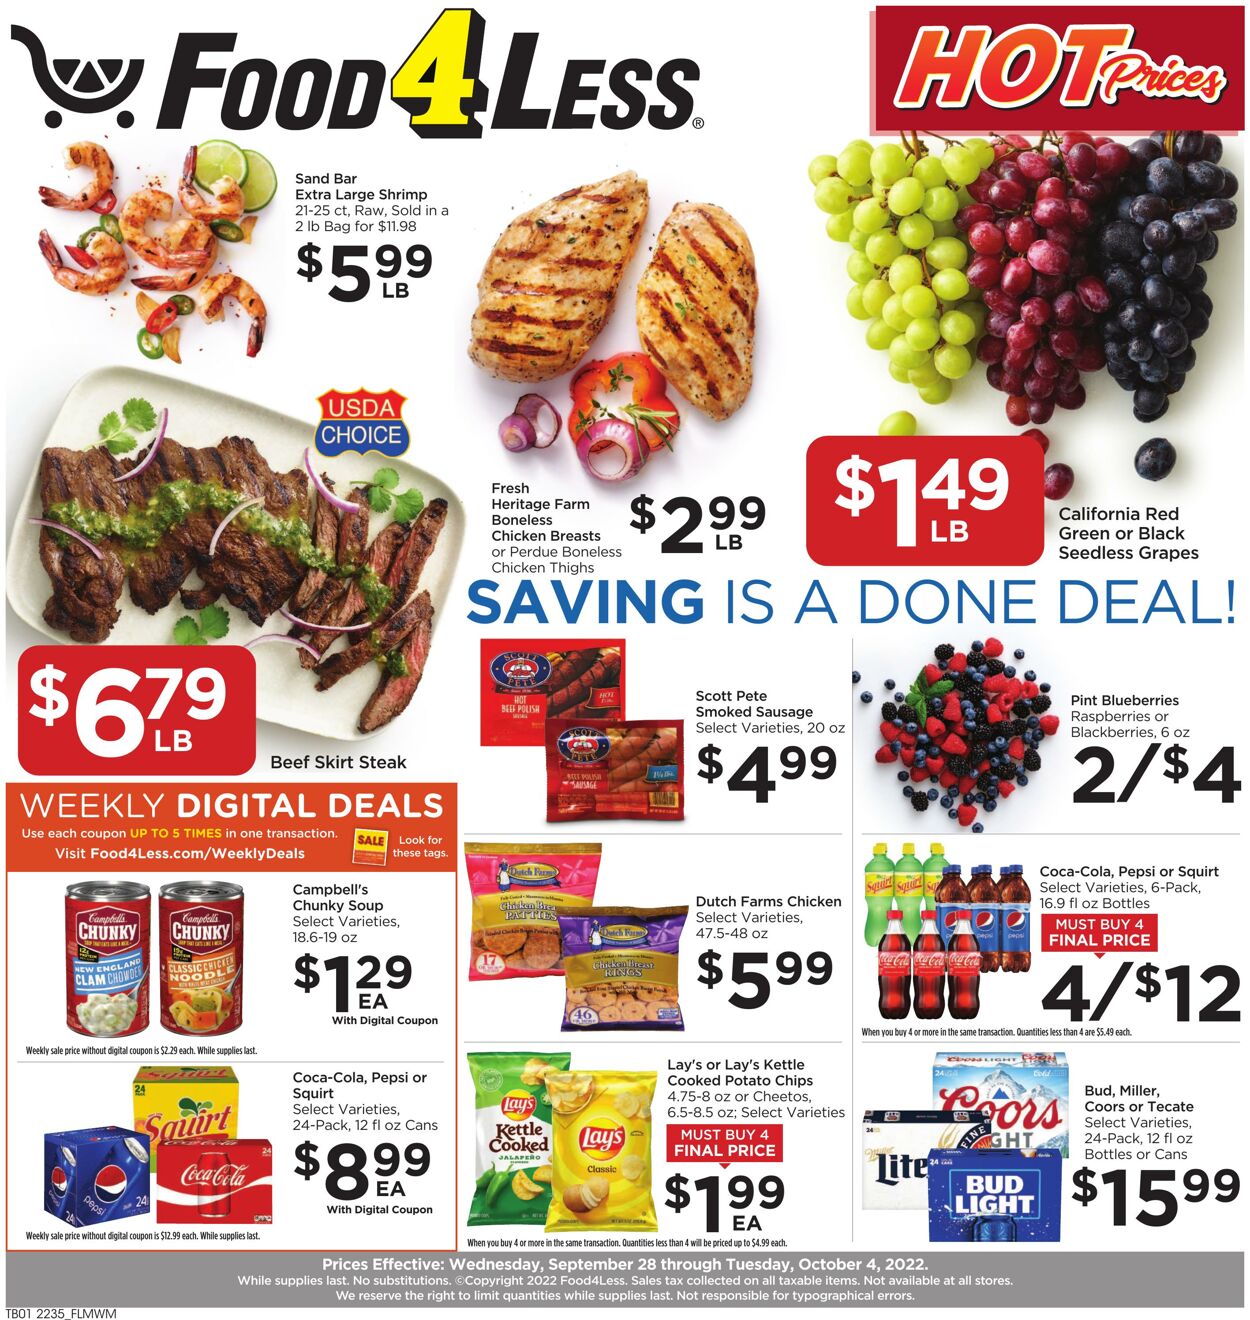 Food 4 less Promotional weekly ads